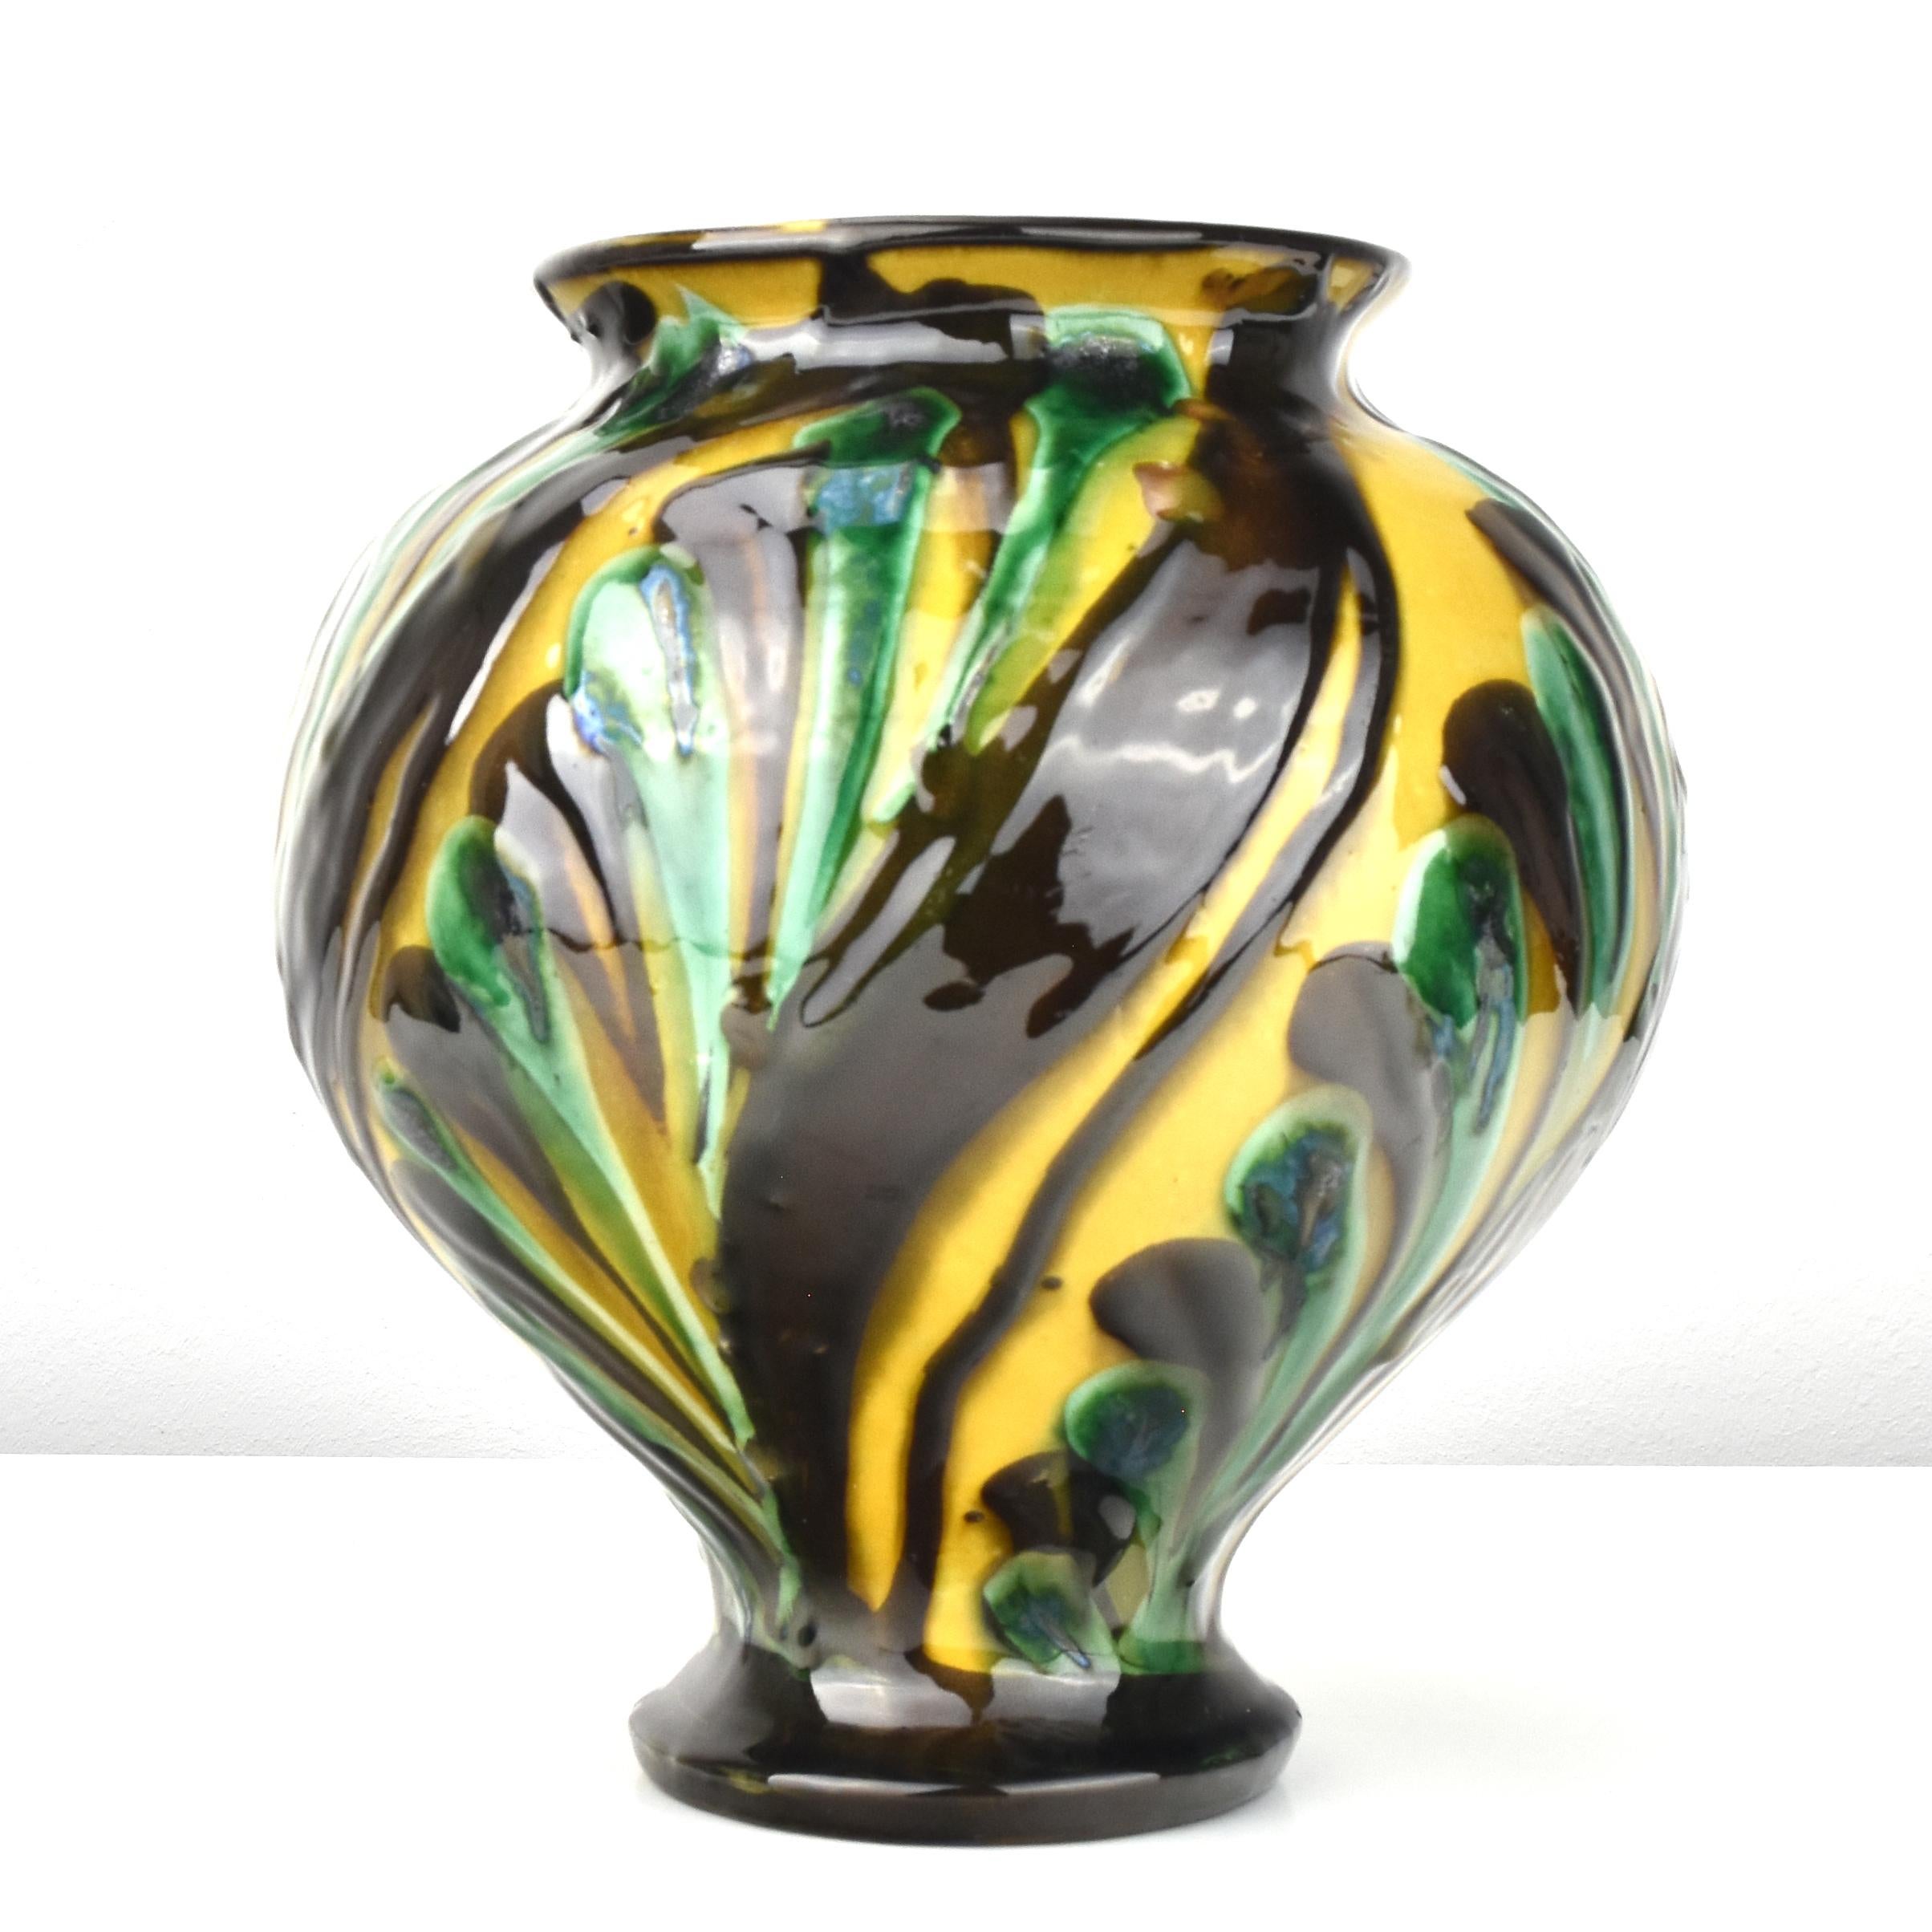  A baluster shaped vase with high glossy finish made in the 1920s by the famous Danish potterer Herman Kähler.
The glazes shows a beautiful surrounding leaf-shaped decoration and it displays stunning light reflections.
